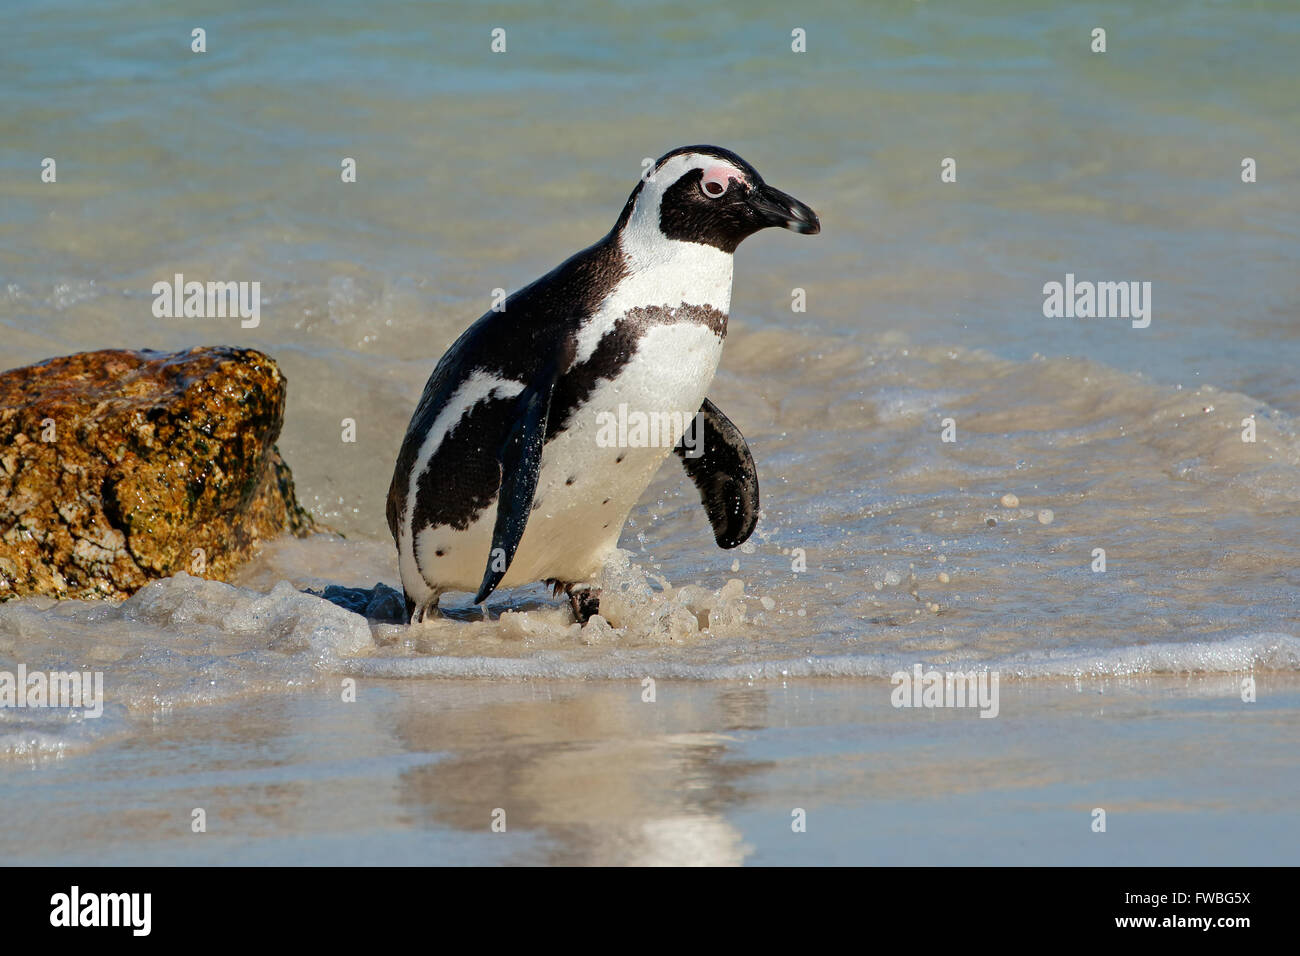 African penguin (Spheniscus demersus) in shallow water, Western Cape, South Africa Stock Photo